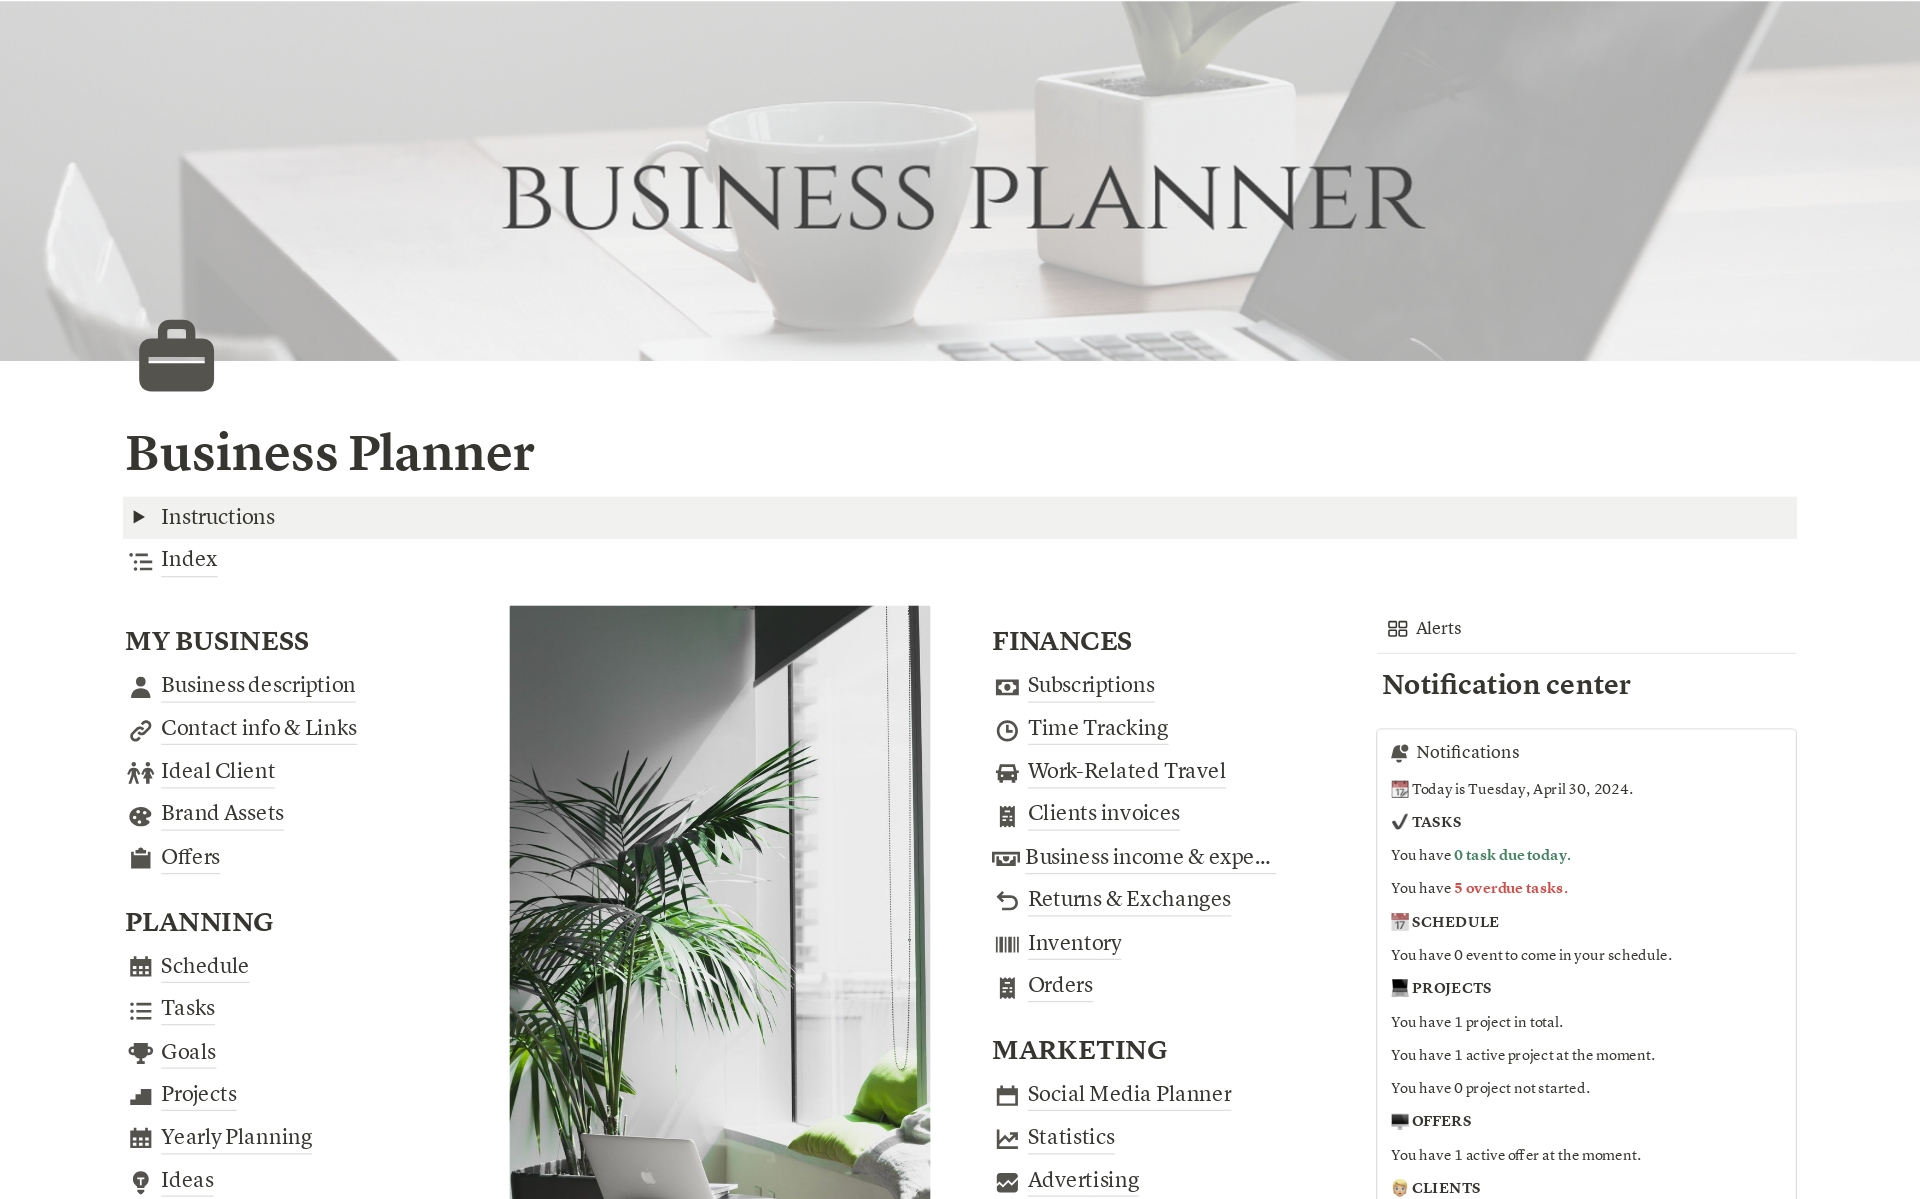 This business planner is an all-in-one package for business that lets you organize your entire business, from marketing and finance to planning, customers, products, human resources and much more.